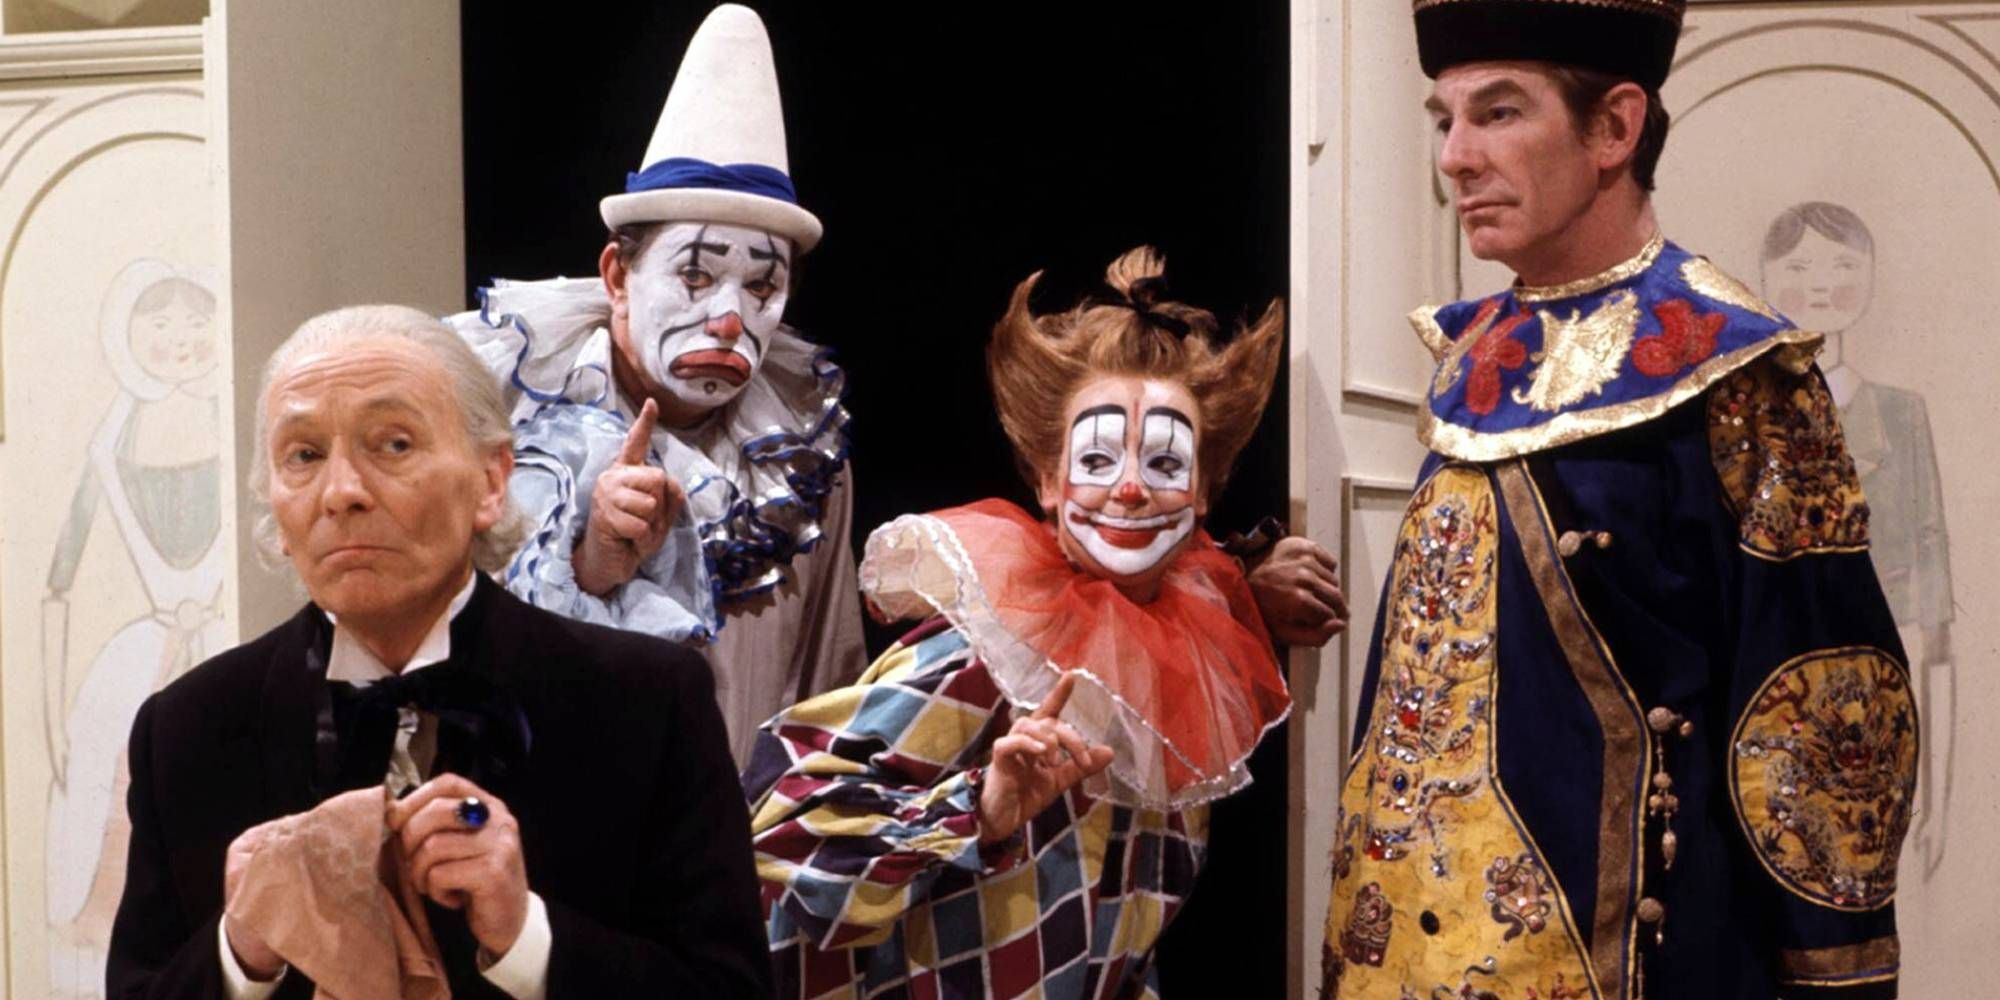 The First Doctor surrounded by a pair of clowns and the Celestial Toymaker